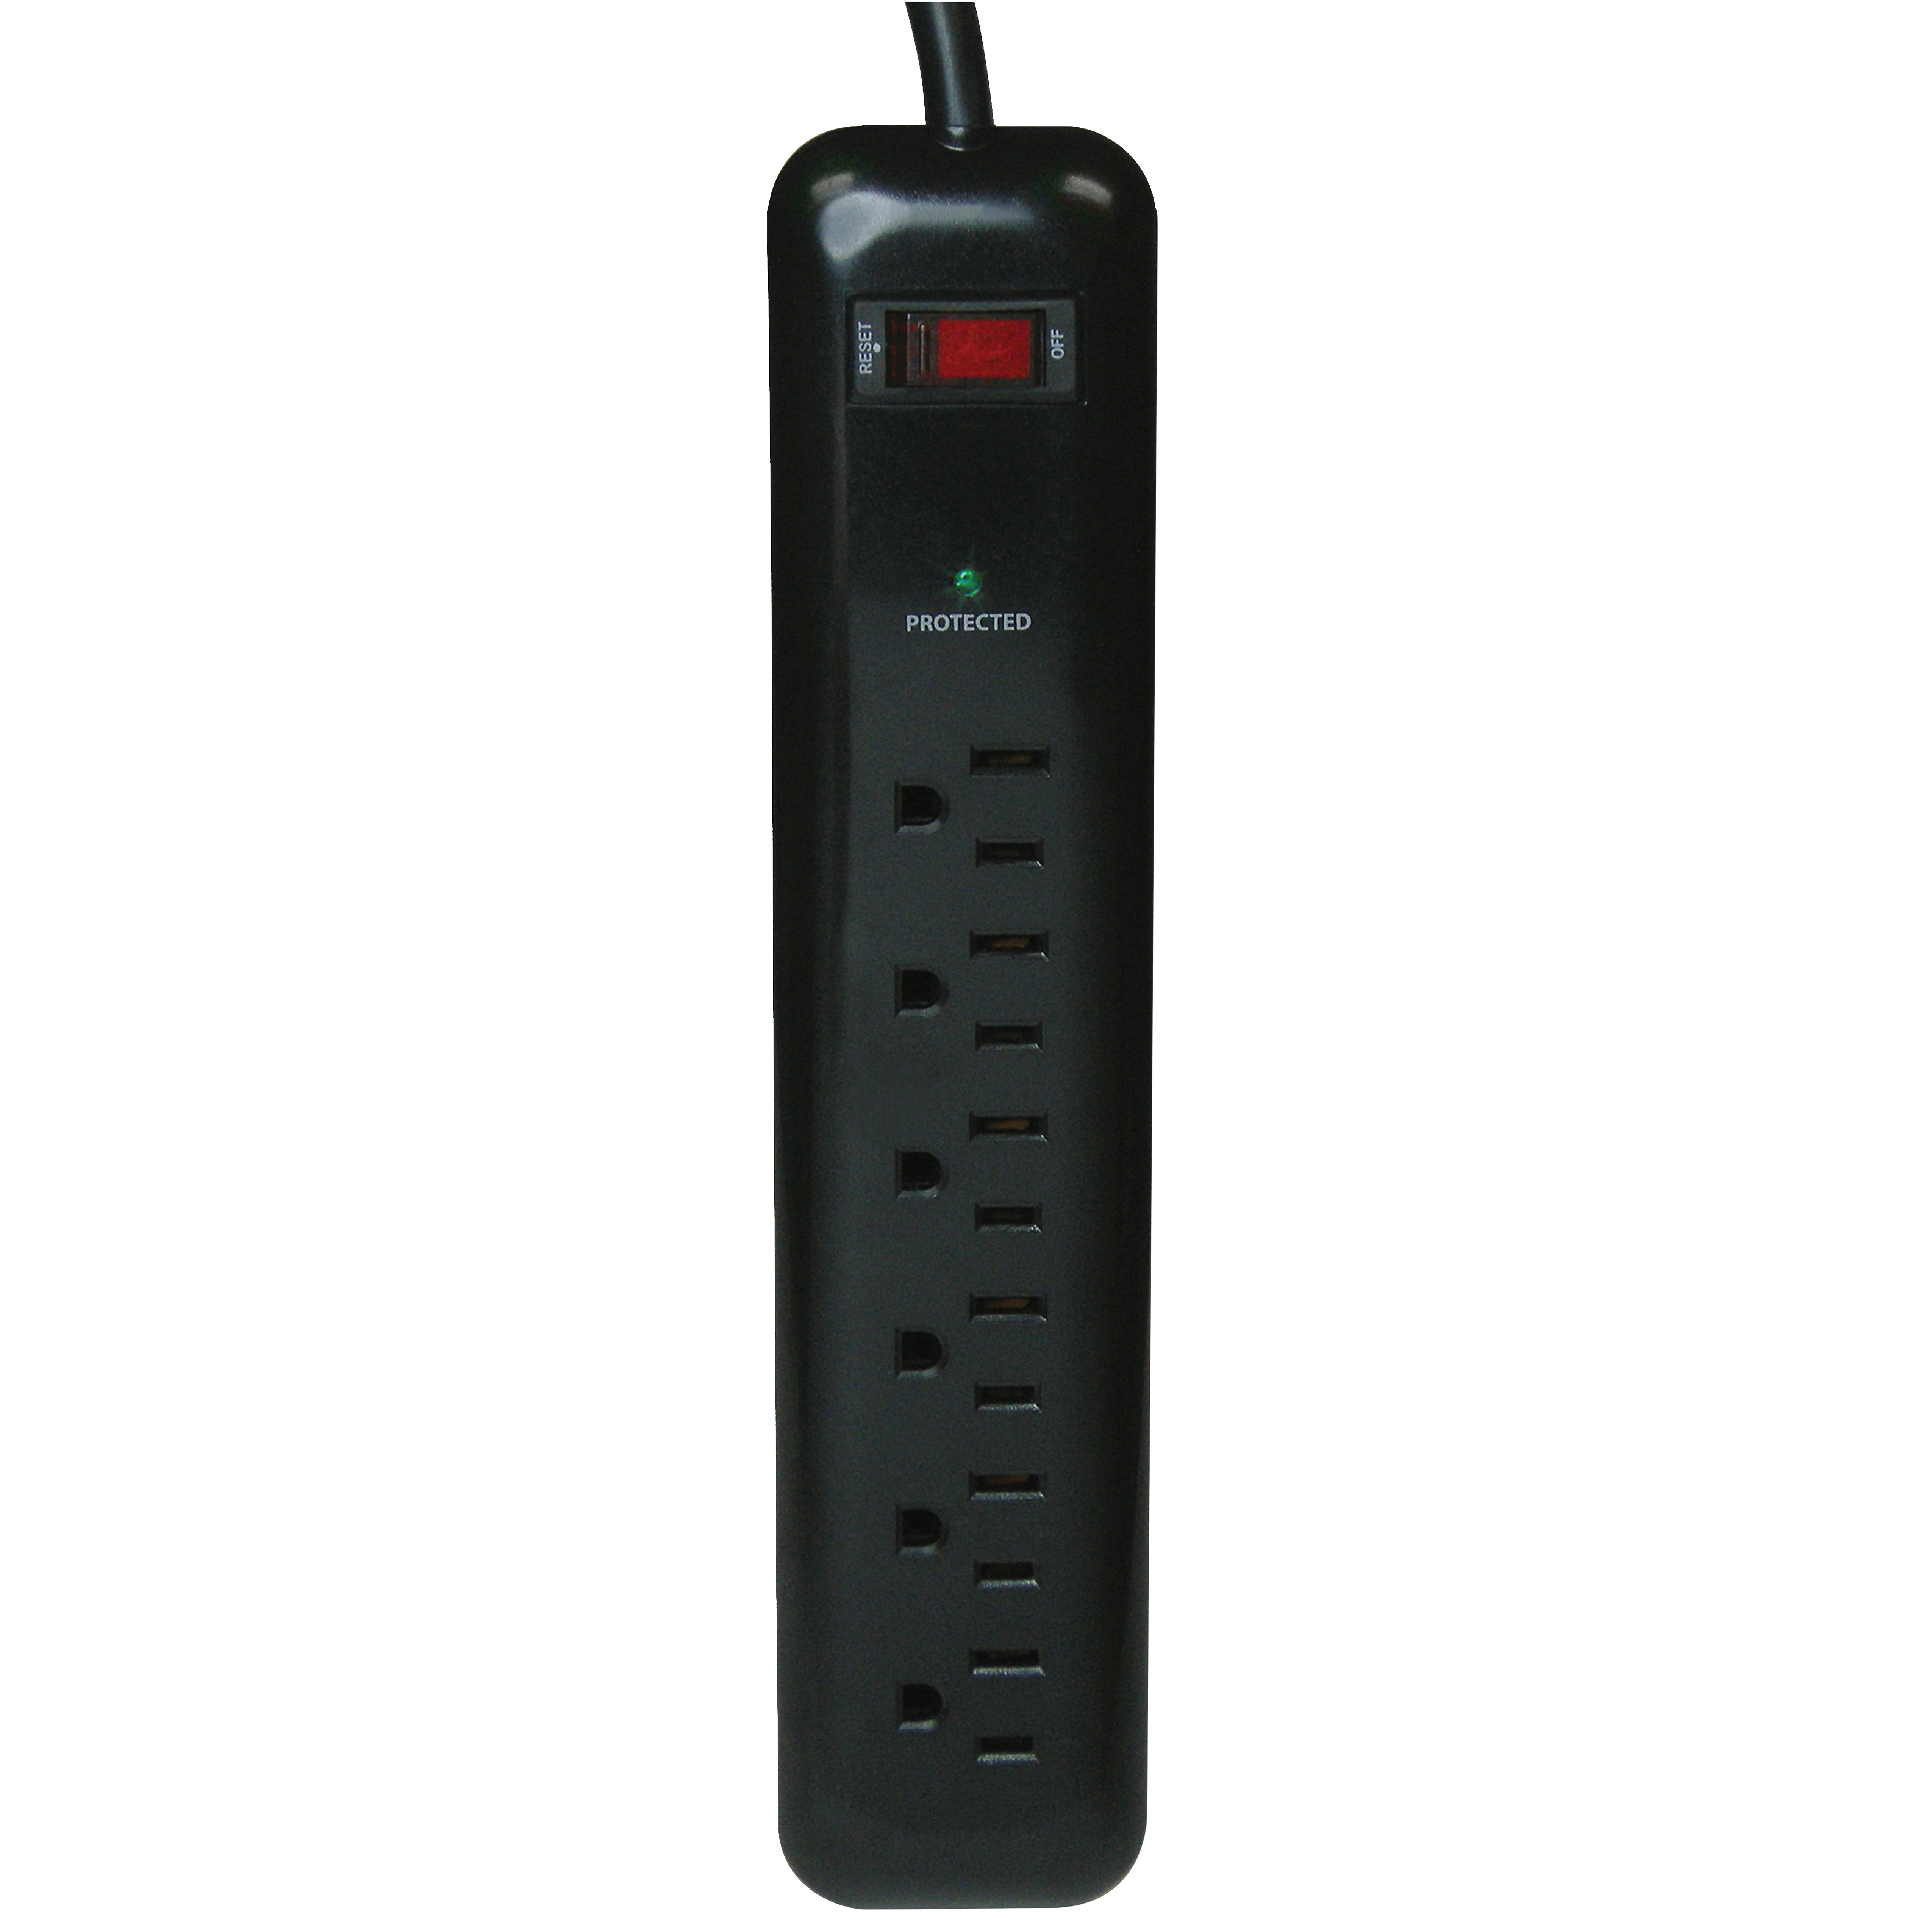 PowerZone OR802225 Surge Protector Tap Strip, 125 V, 15 A, 6-Outlet, 1000 Joules Energy, Black - 3